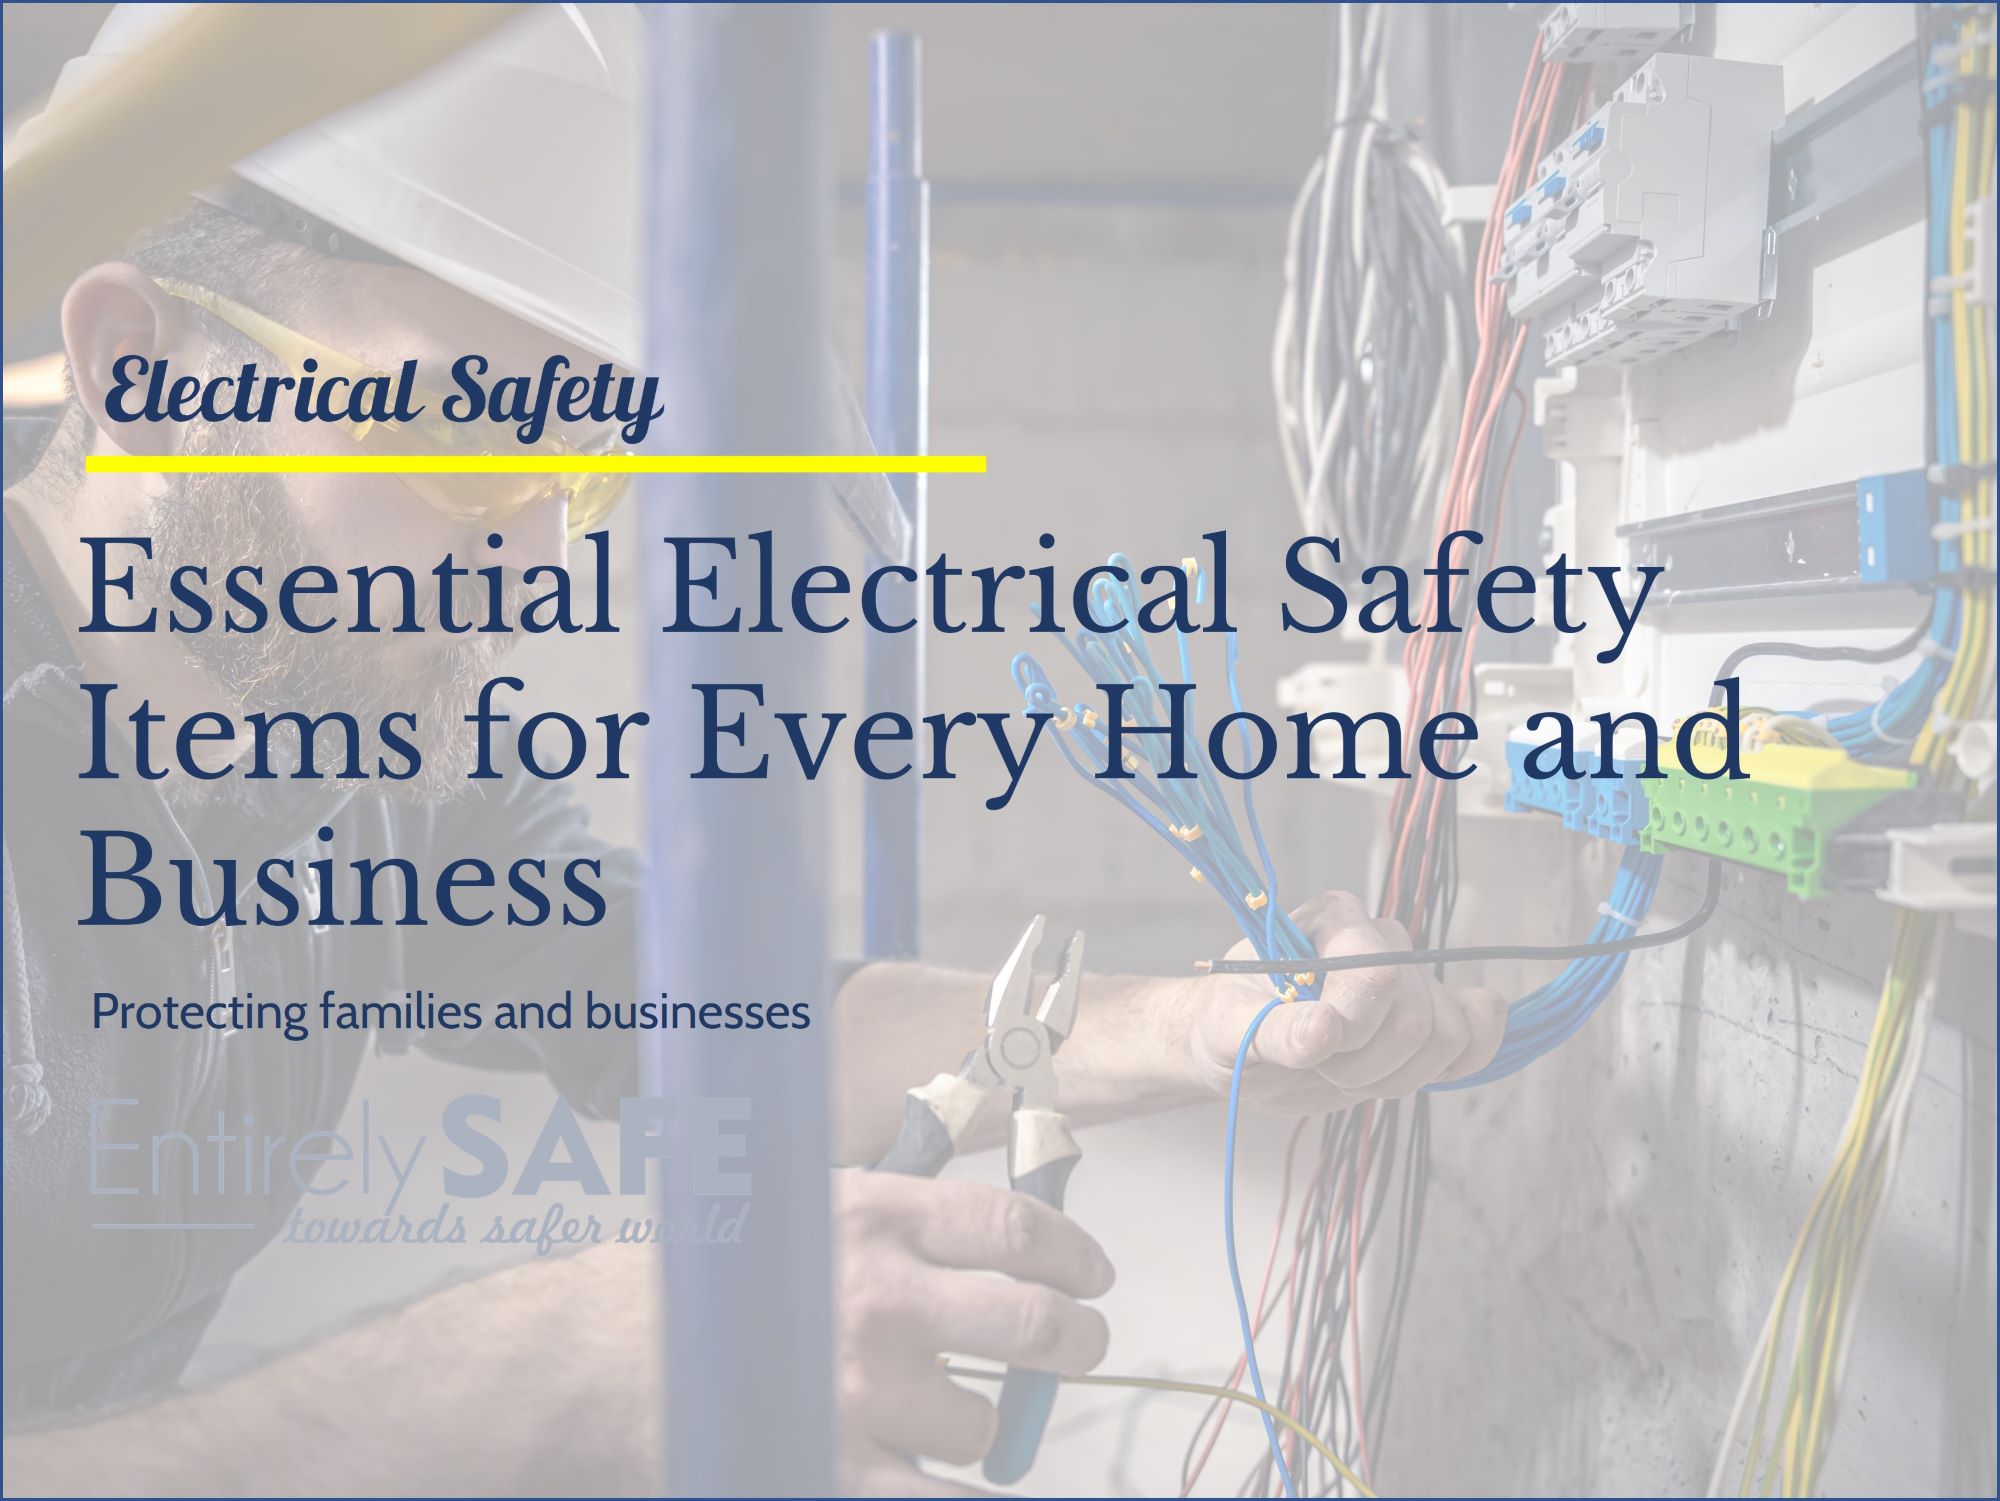 Essential Electrical Safety Items for Every Home and Business